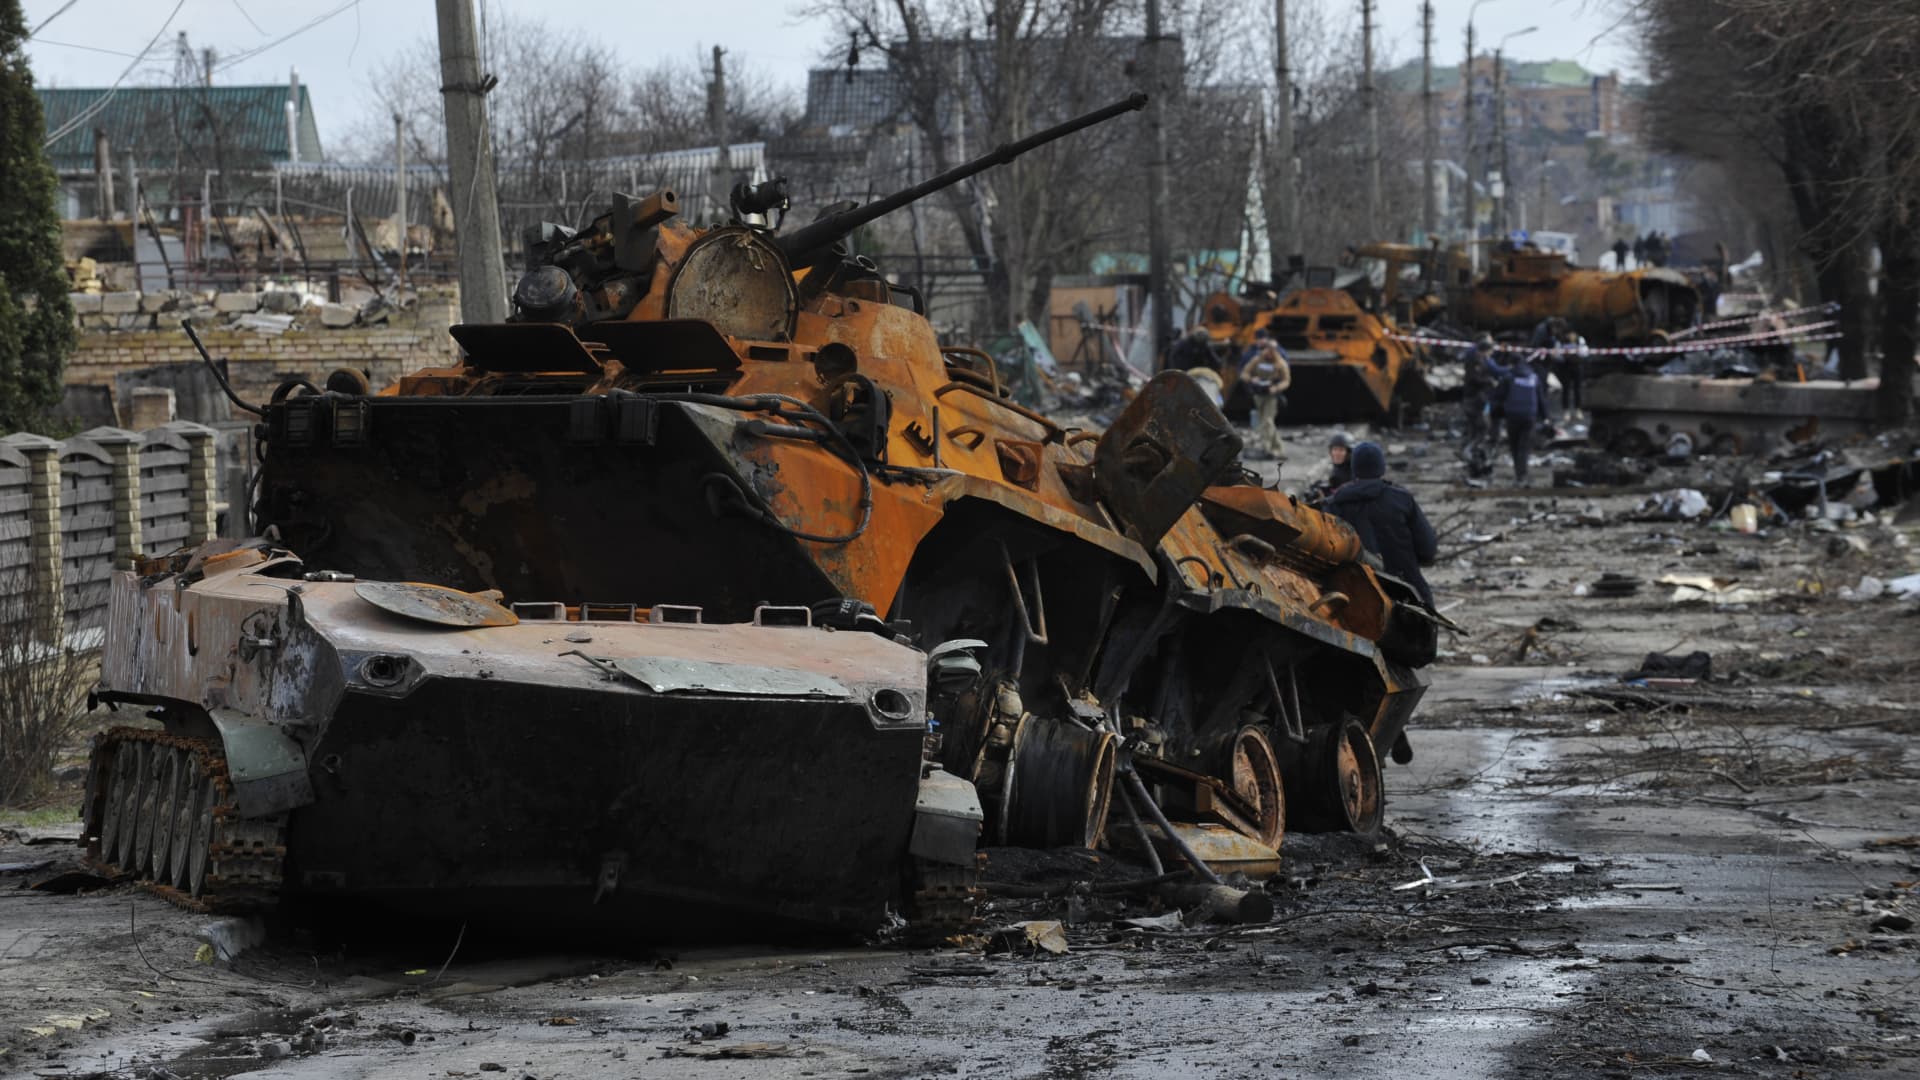 Destroyed military equipment of the Russian army in the city of Bucha.